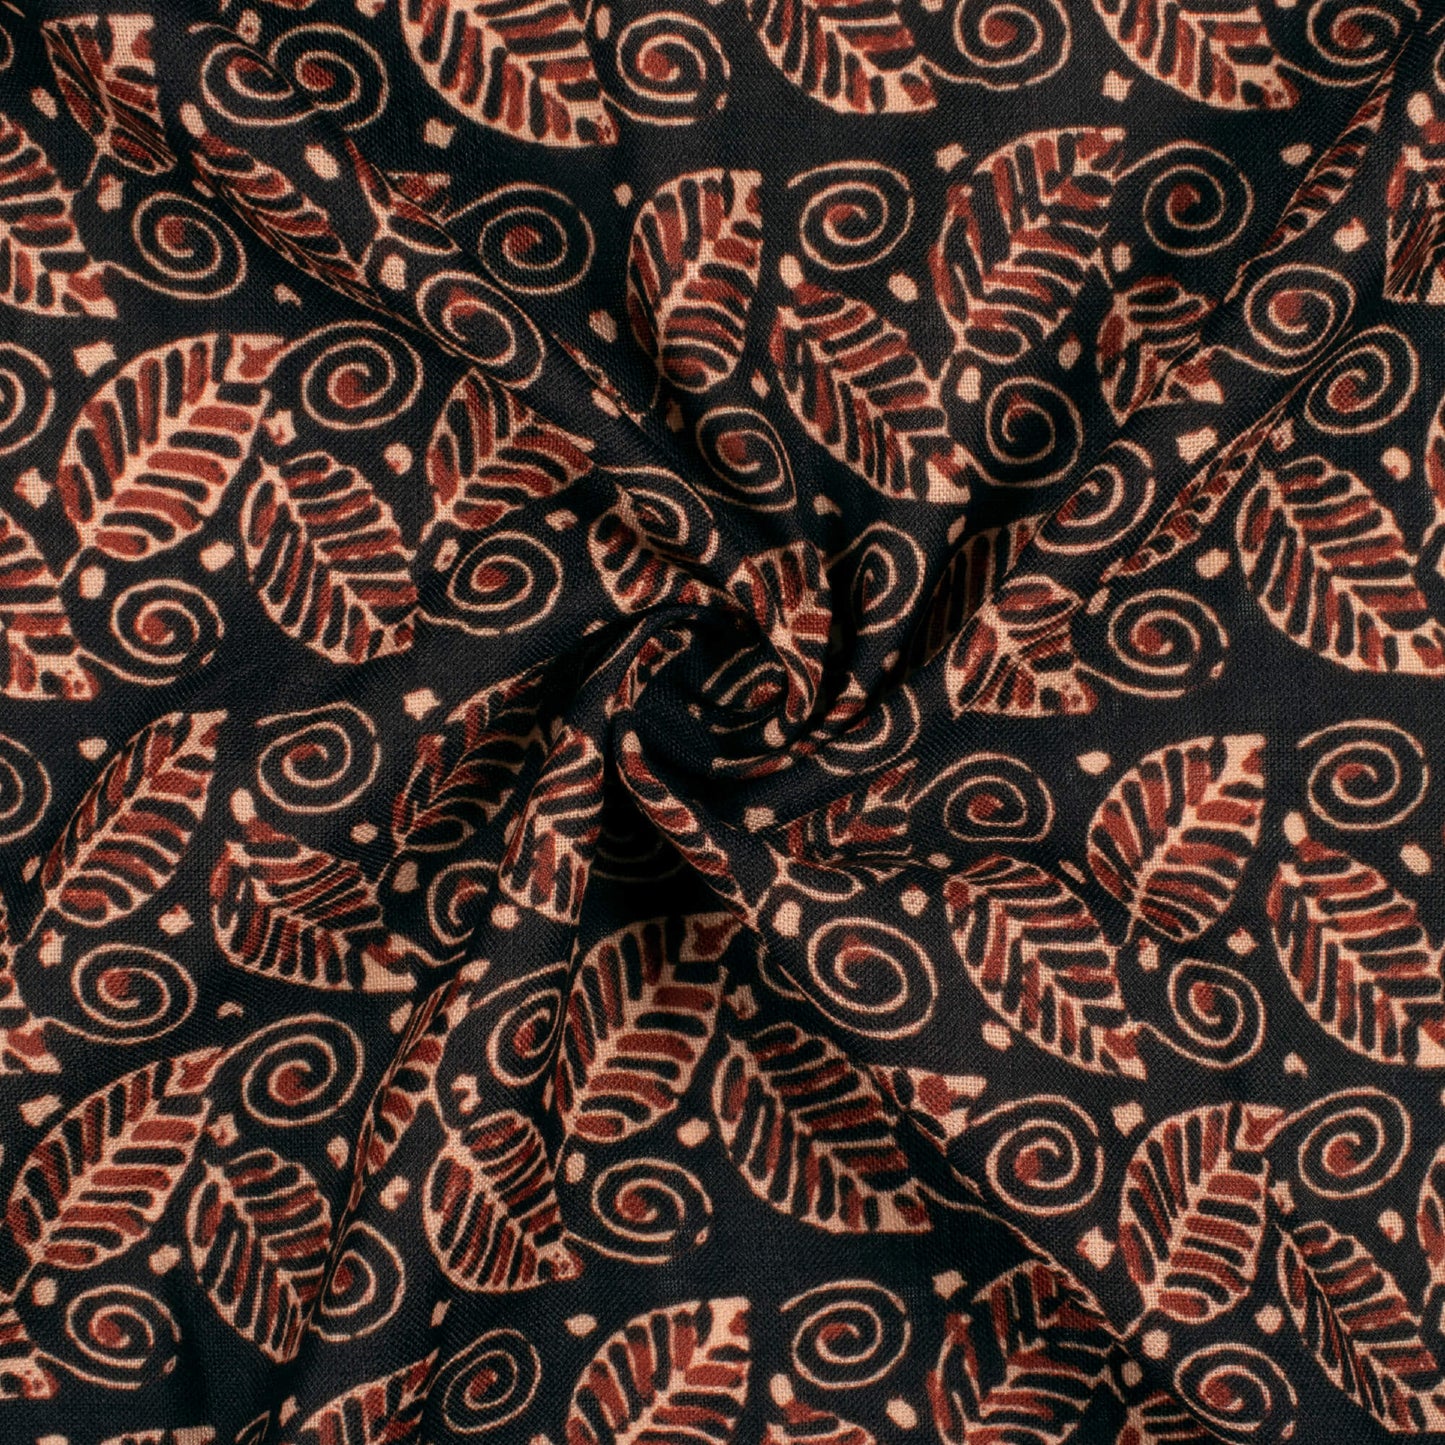 Black And Maroon Ajrakh Pattern Digital Print Linen Textured Fabric (Width 56 Inches)